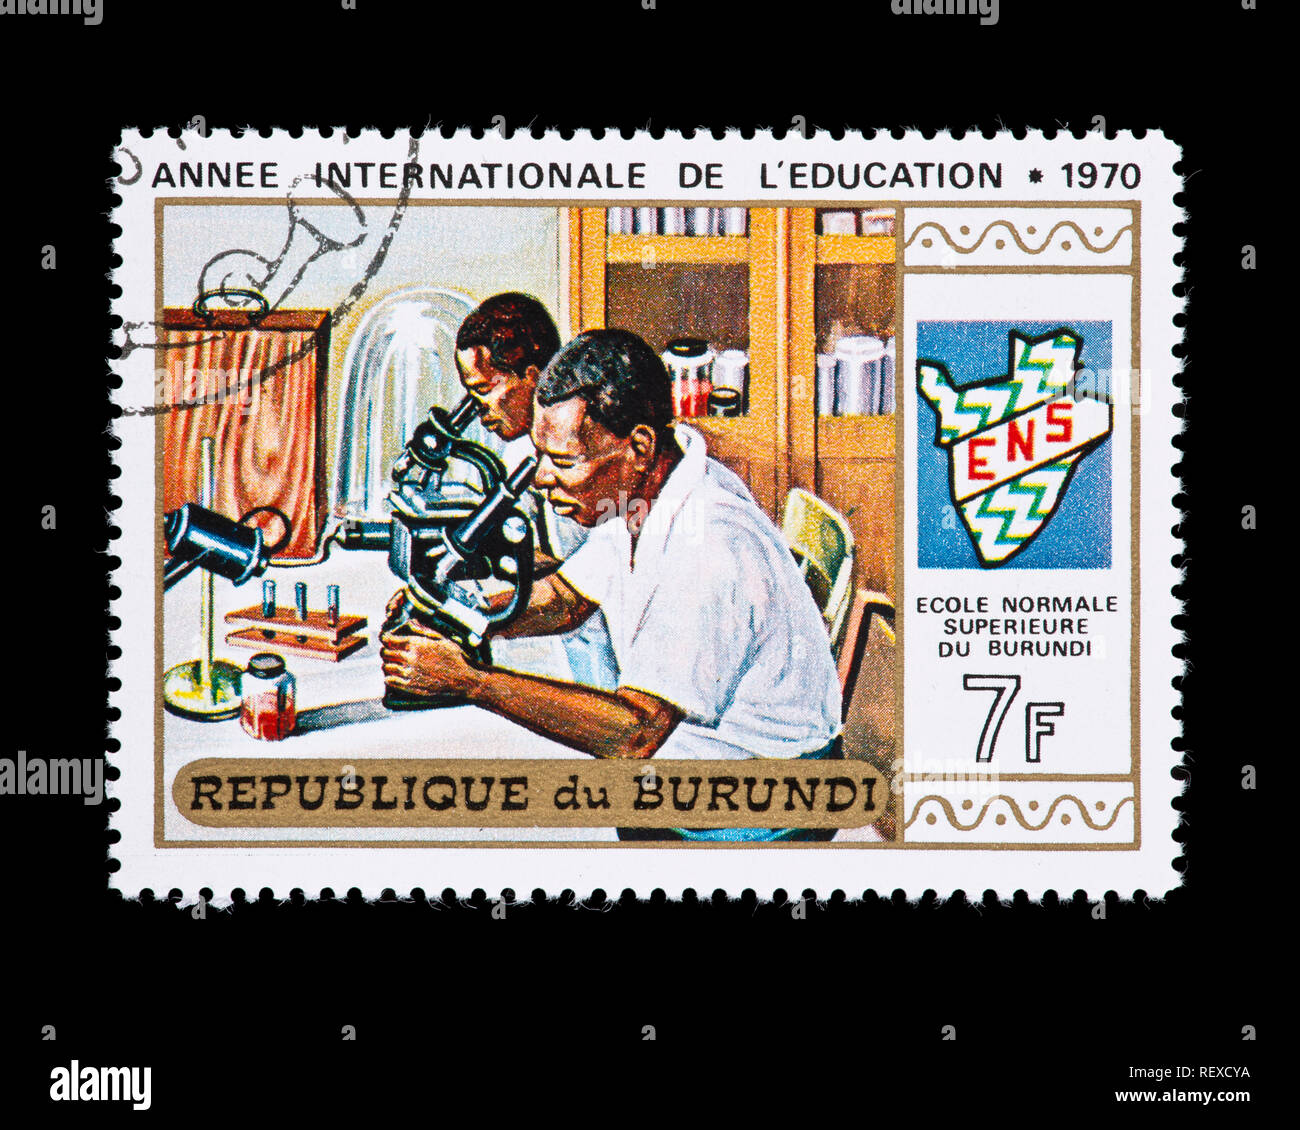 Postage stamp from Burundi depicting students in a laboratory and the emblem of the Ecole Normale Superieure of Burundi Stock Photo